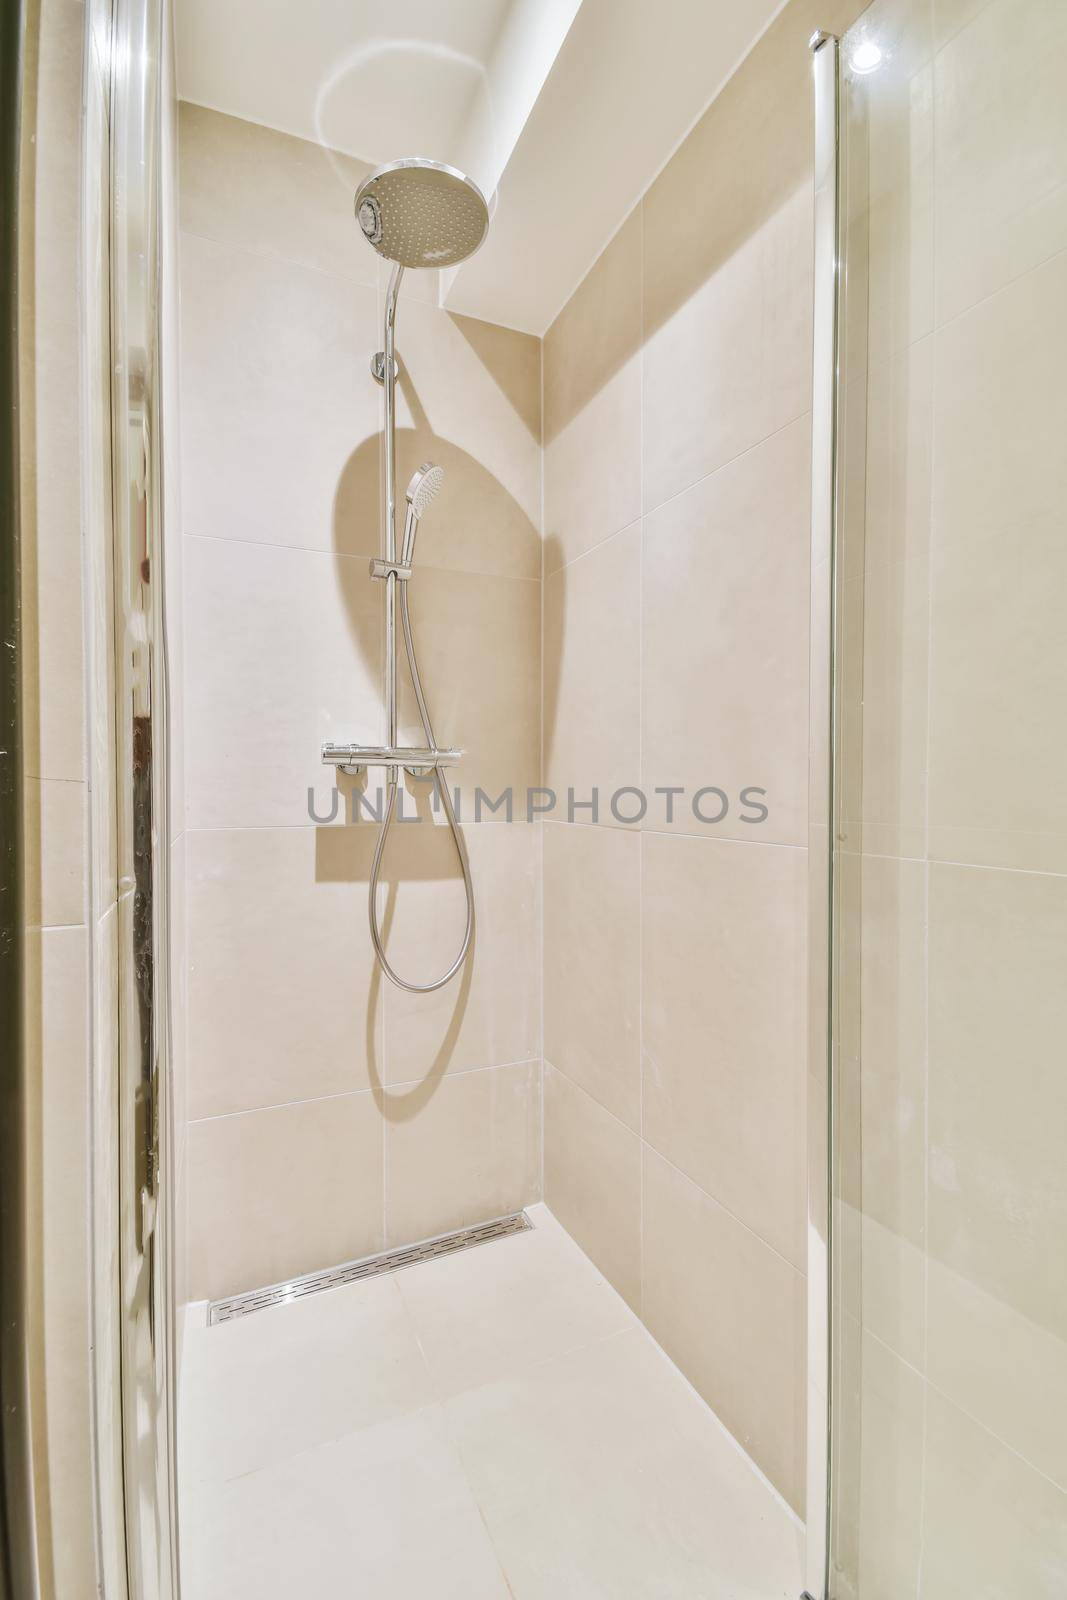 Shower tap in tiled bathroom by casamedia